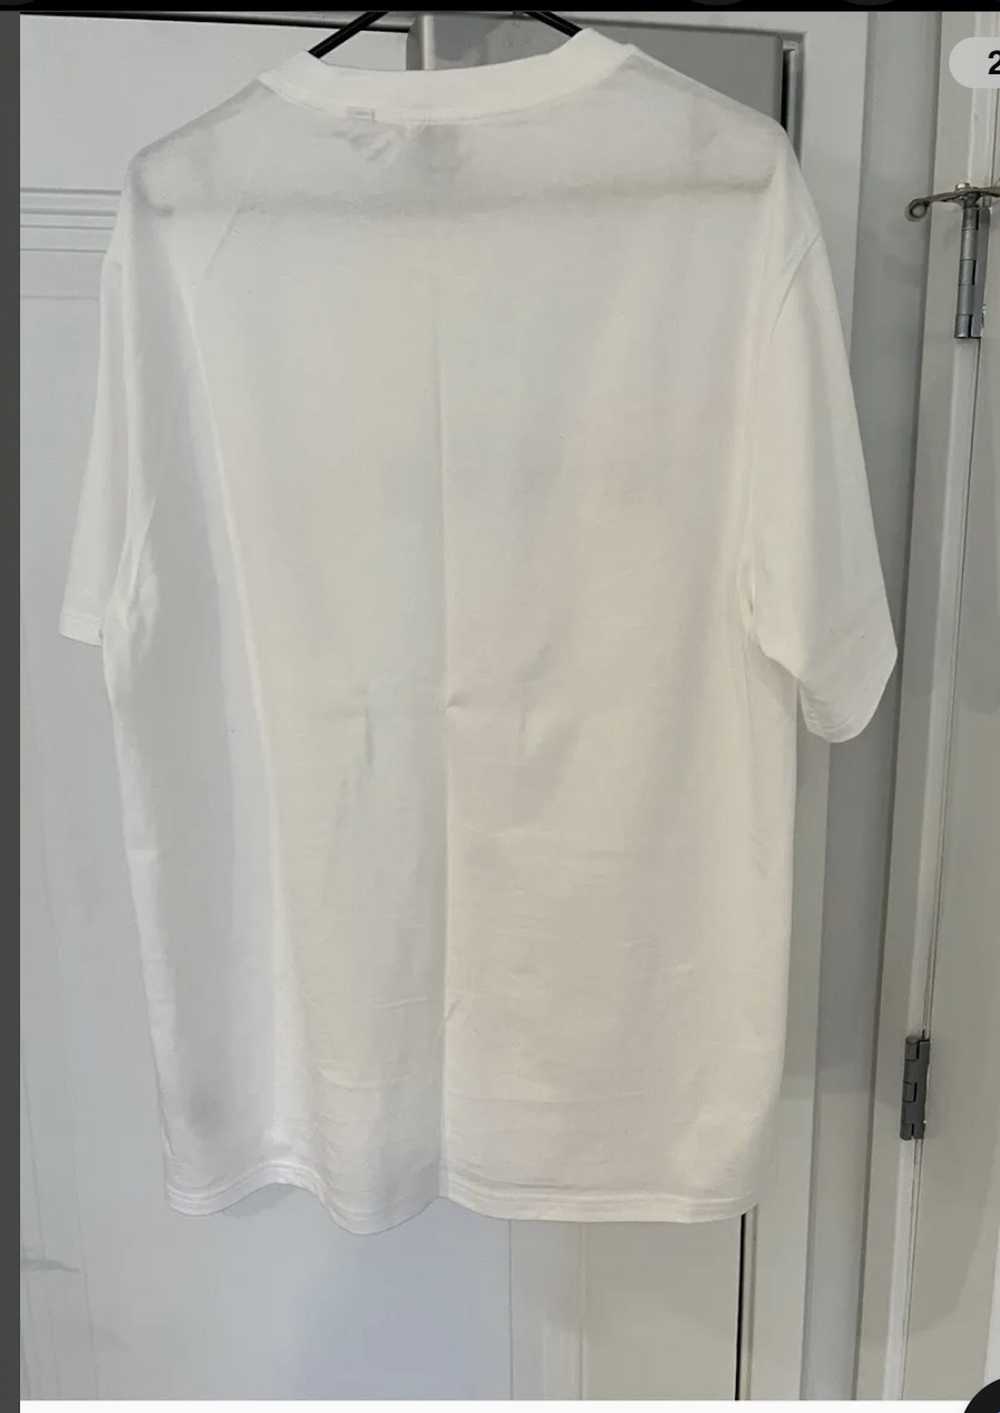 Burberry Burberry t shirt dry clean no stains wor… - image 4